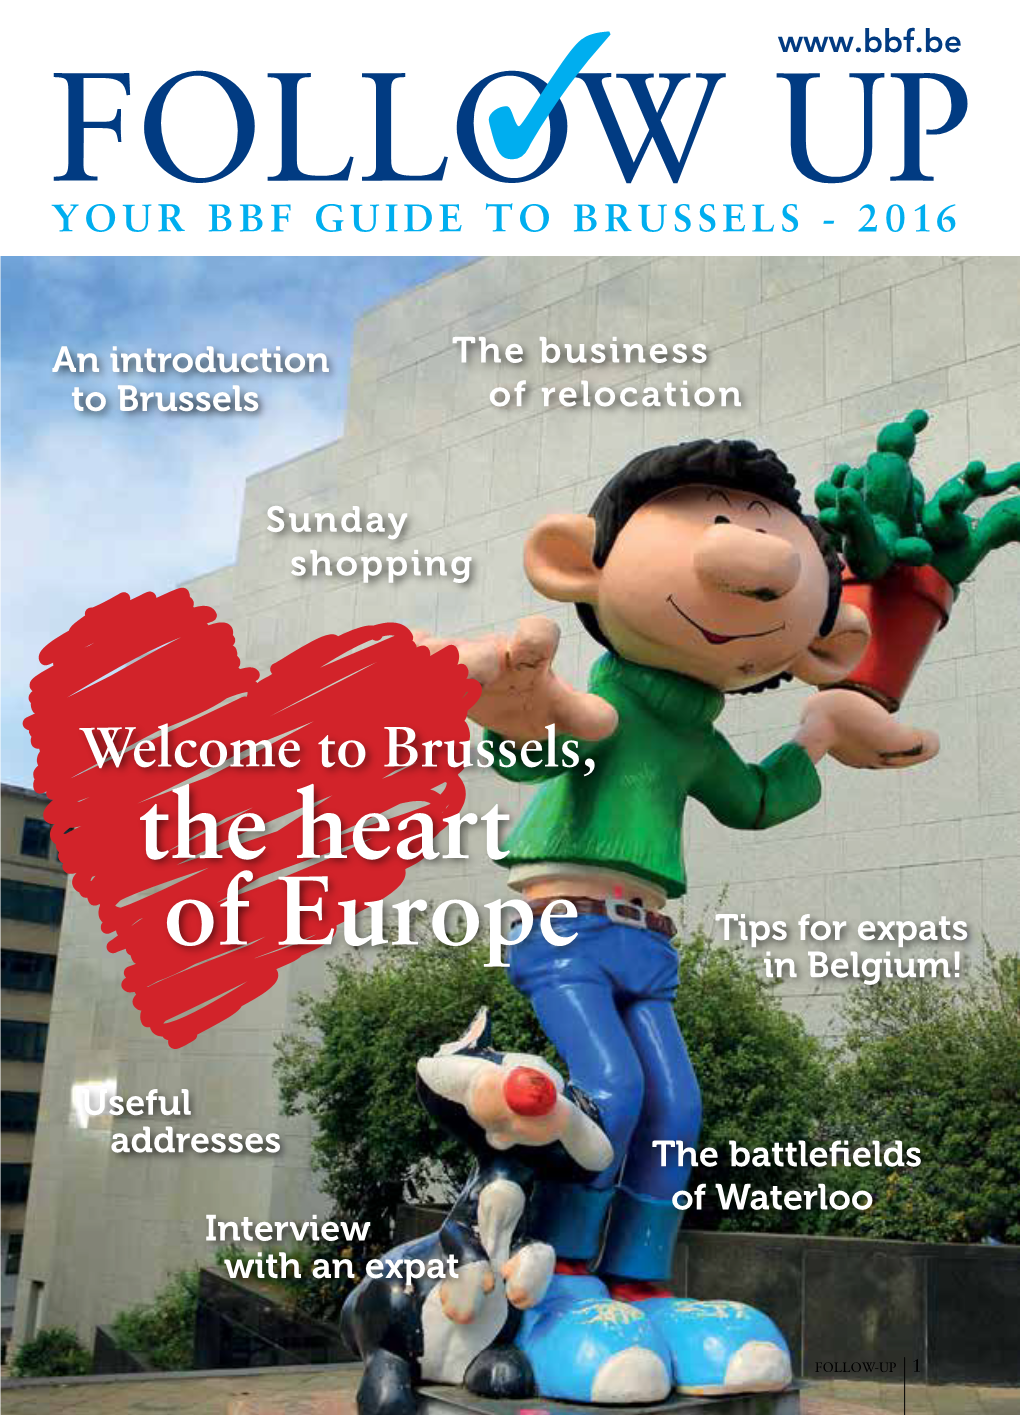 Follow Up, a Handy Guide for Your Stay in Brussels